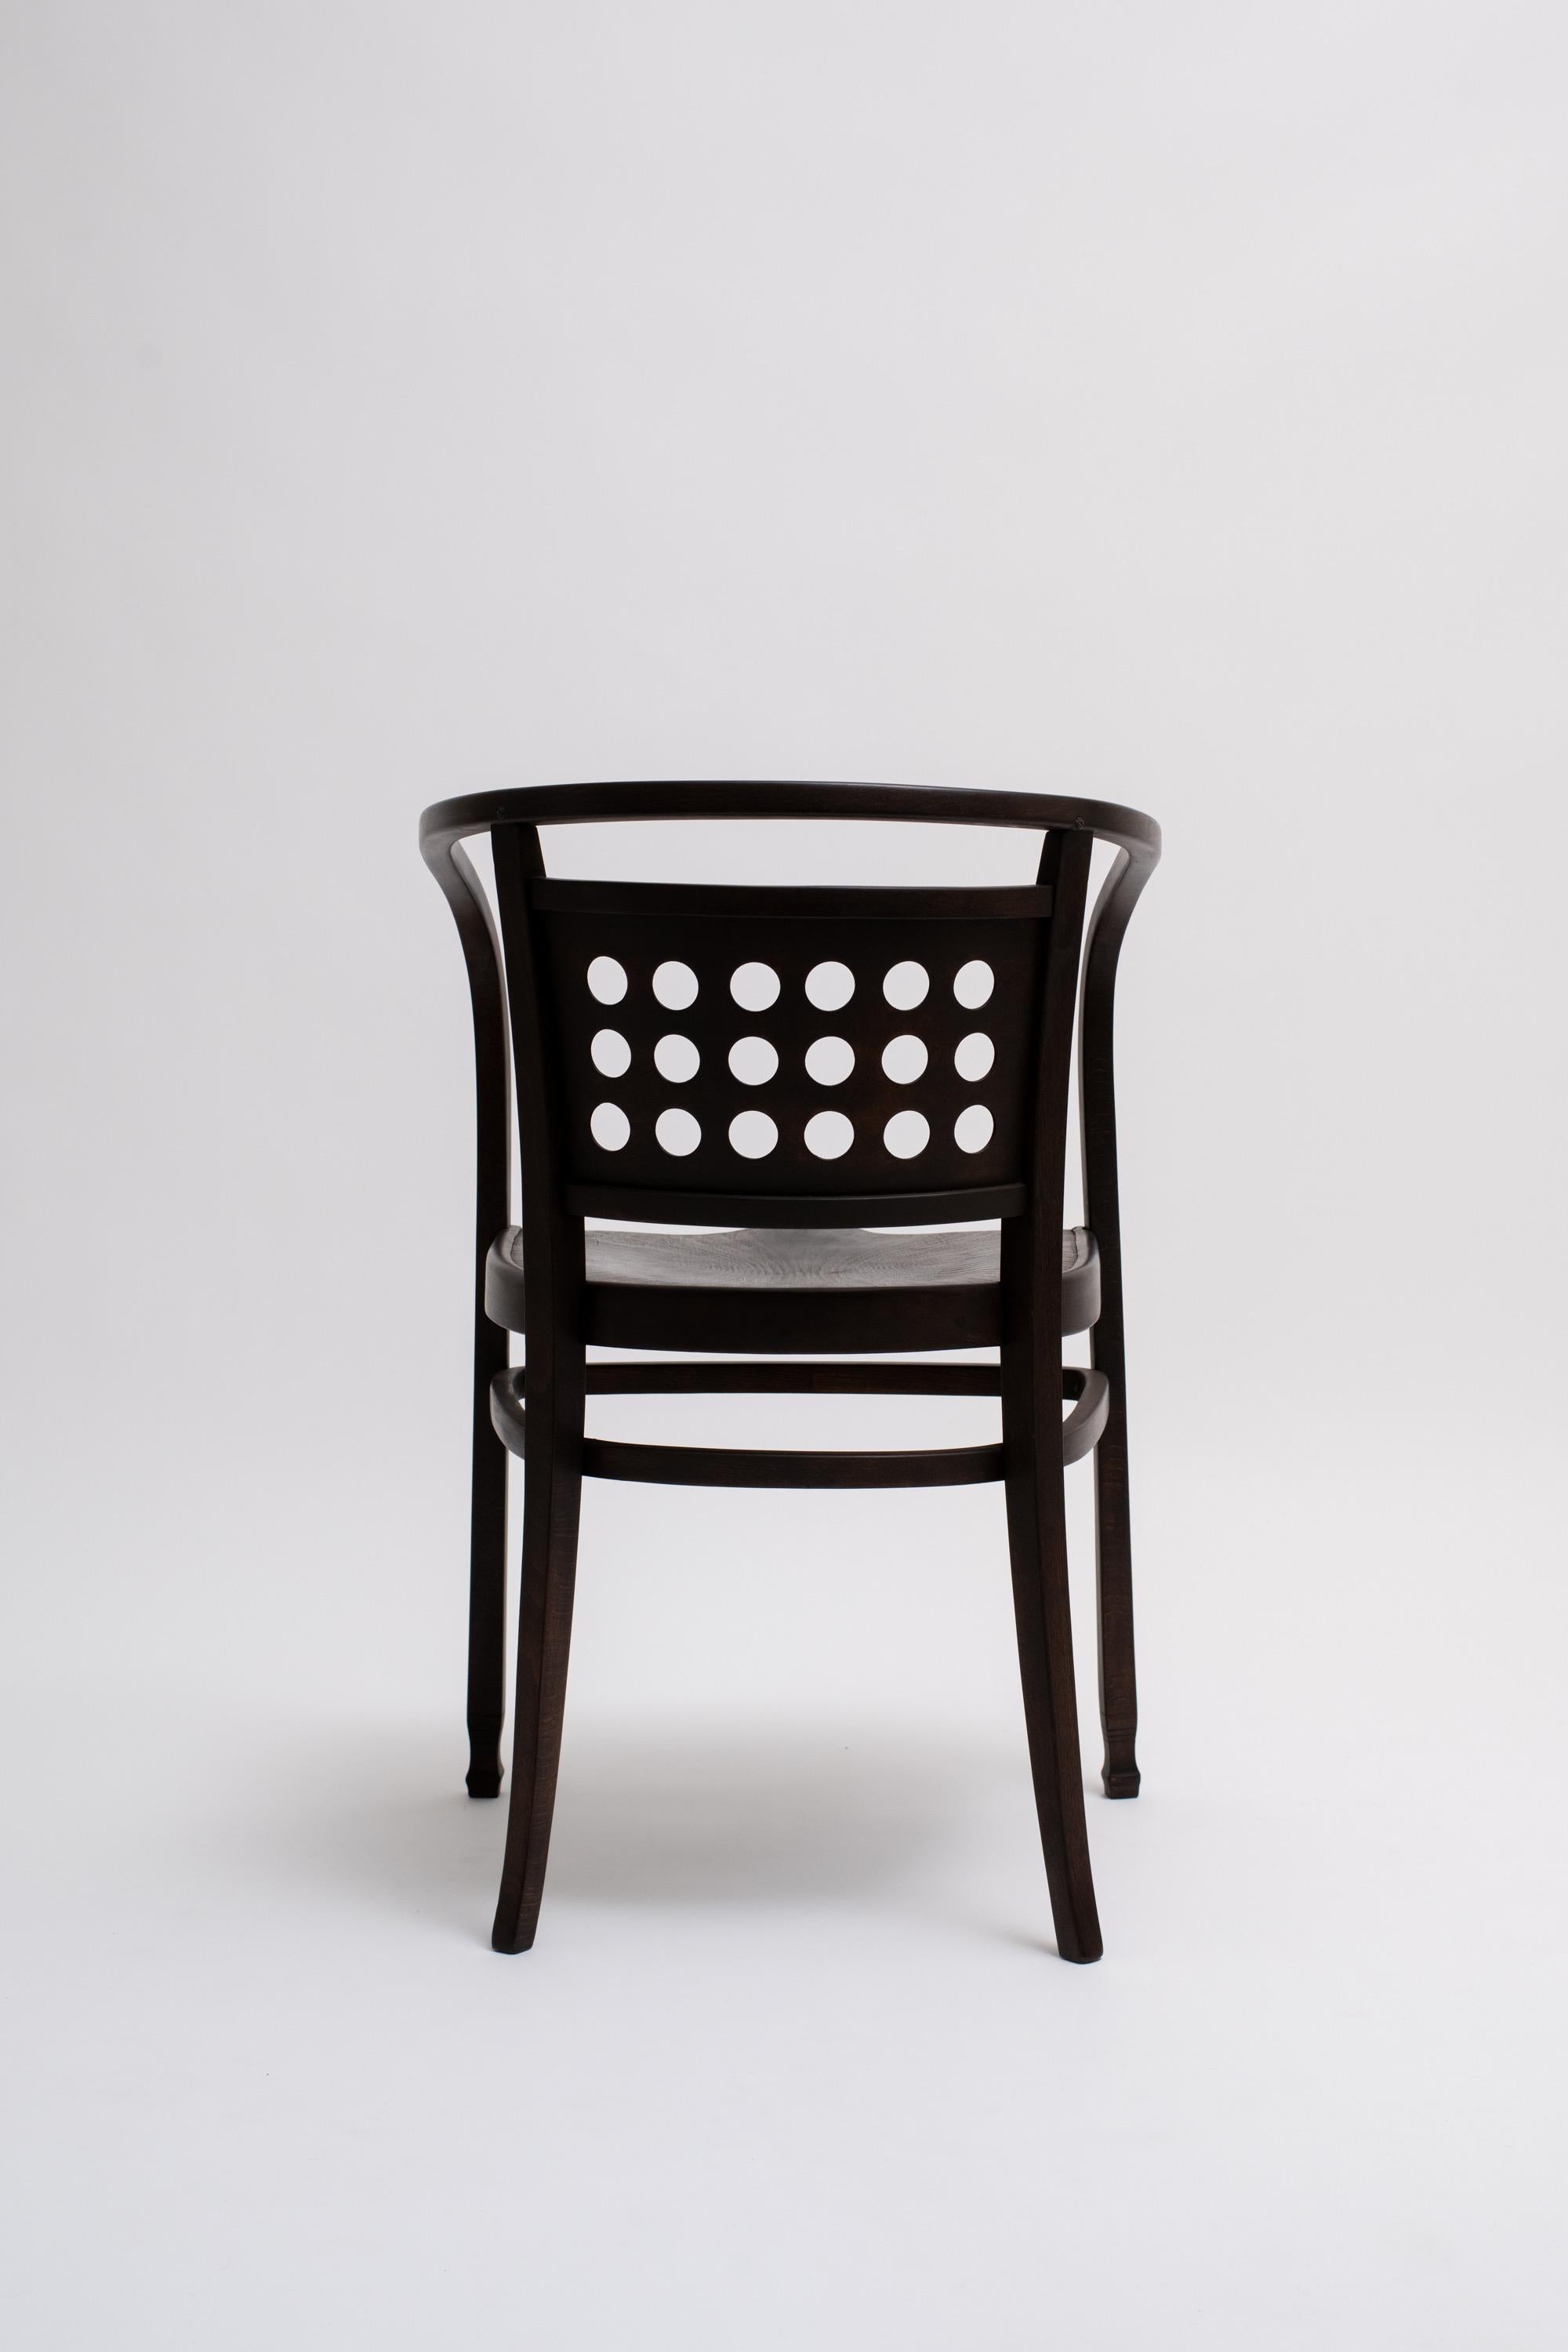 otto wagner chairs